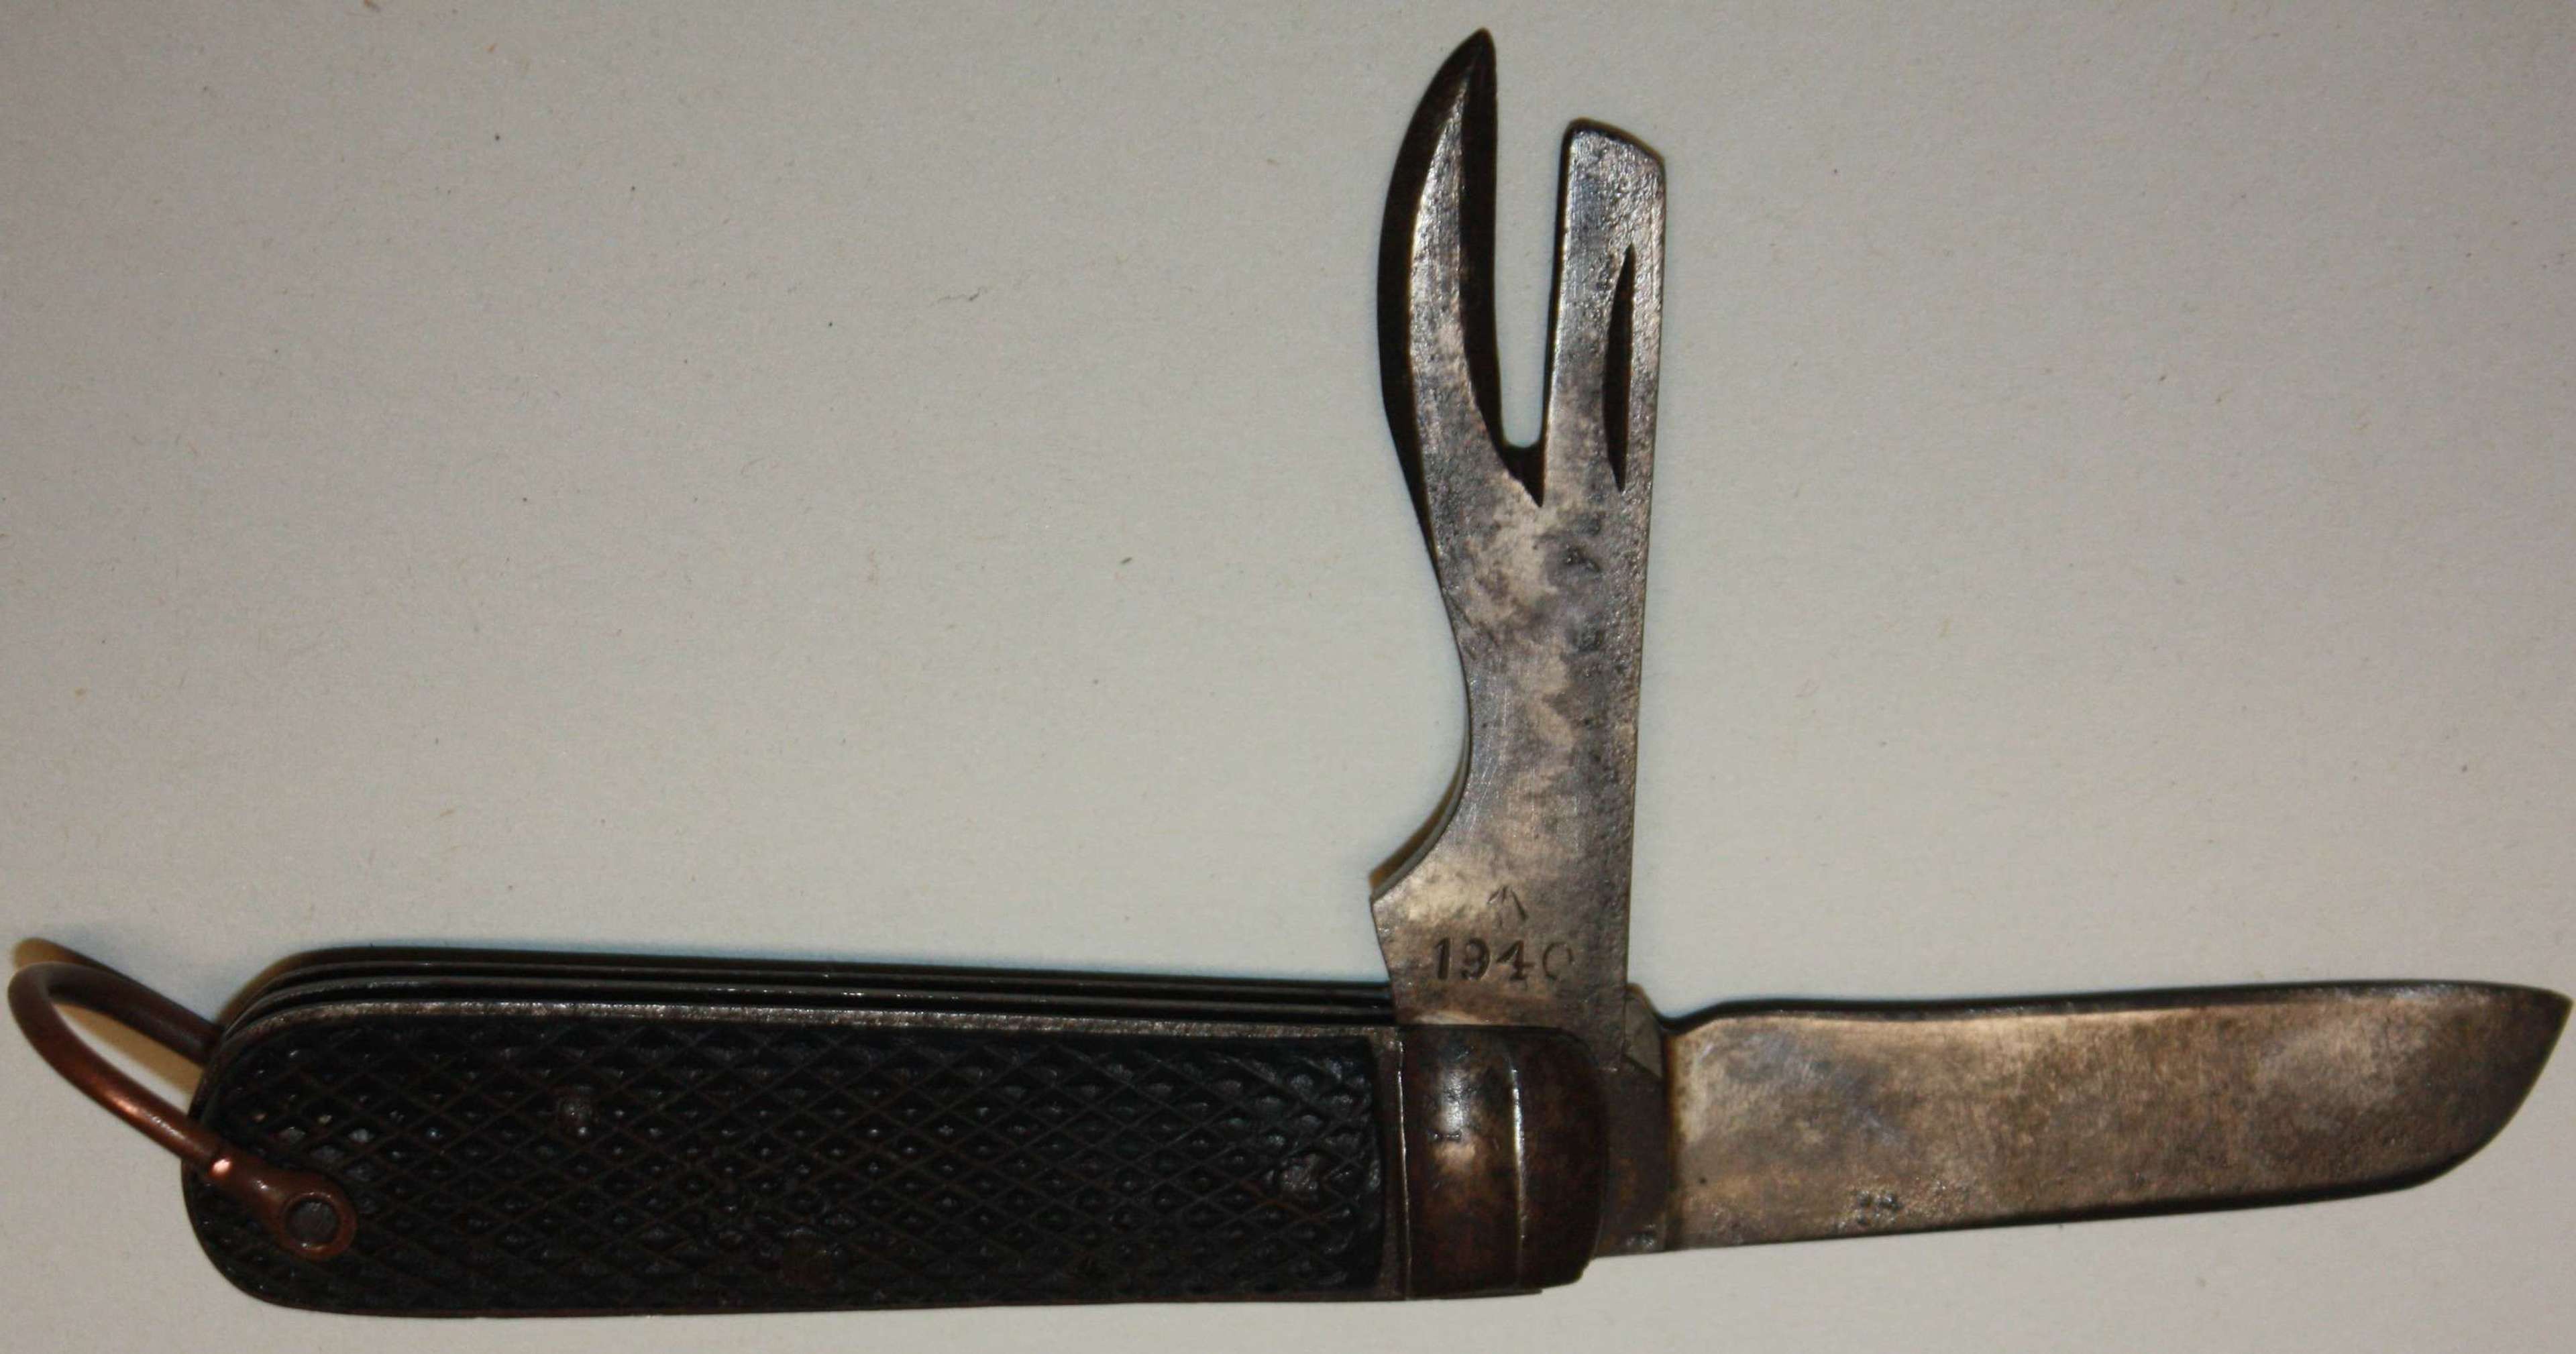 A GOOD BRITISH ISSUE 1940 DATED CLASP KNIFE